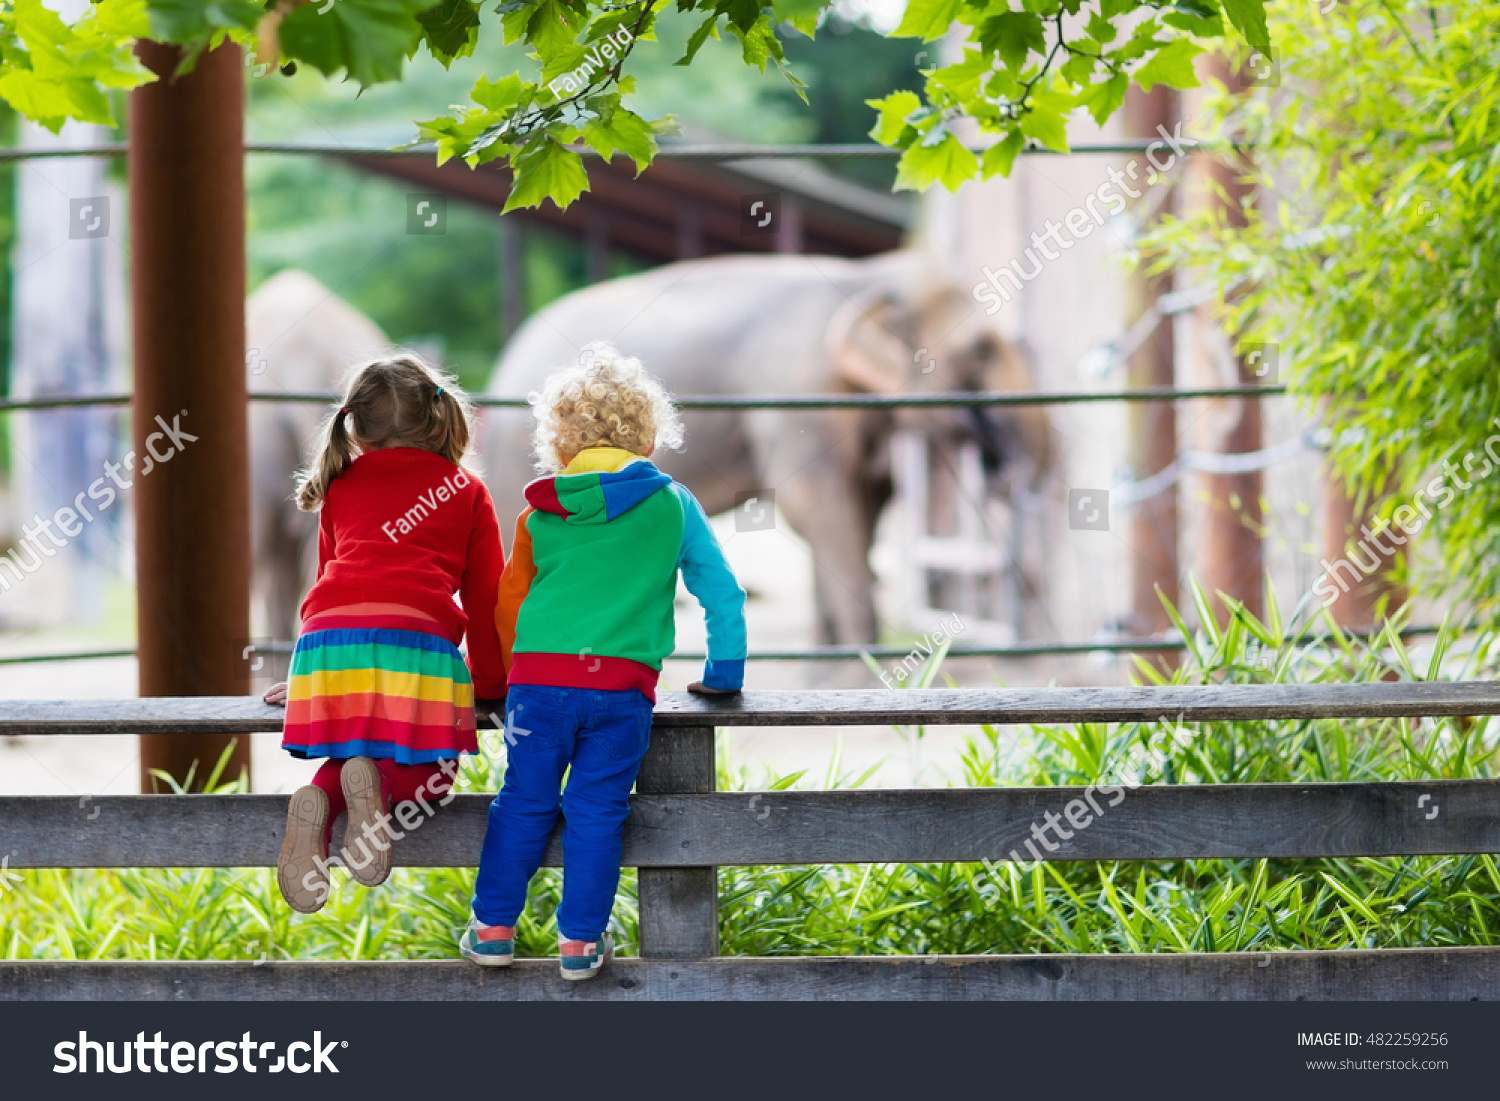 Two children, little toddler boy and preschool girl, brother and sister, watching elephant animals at the zoo on sunny summer day. Wildlife experience for kids at animal safari park.  #482259256